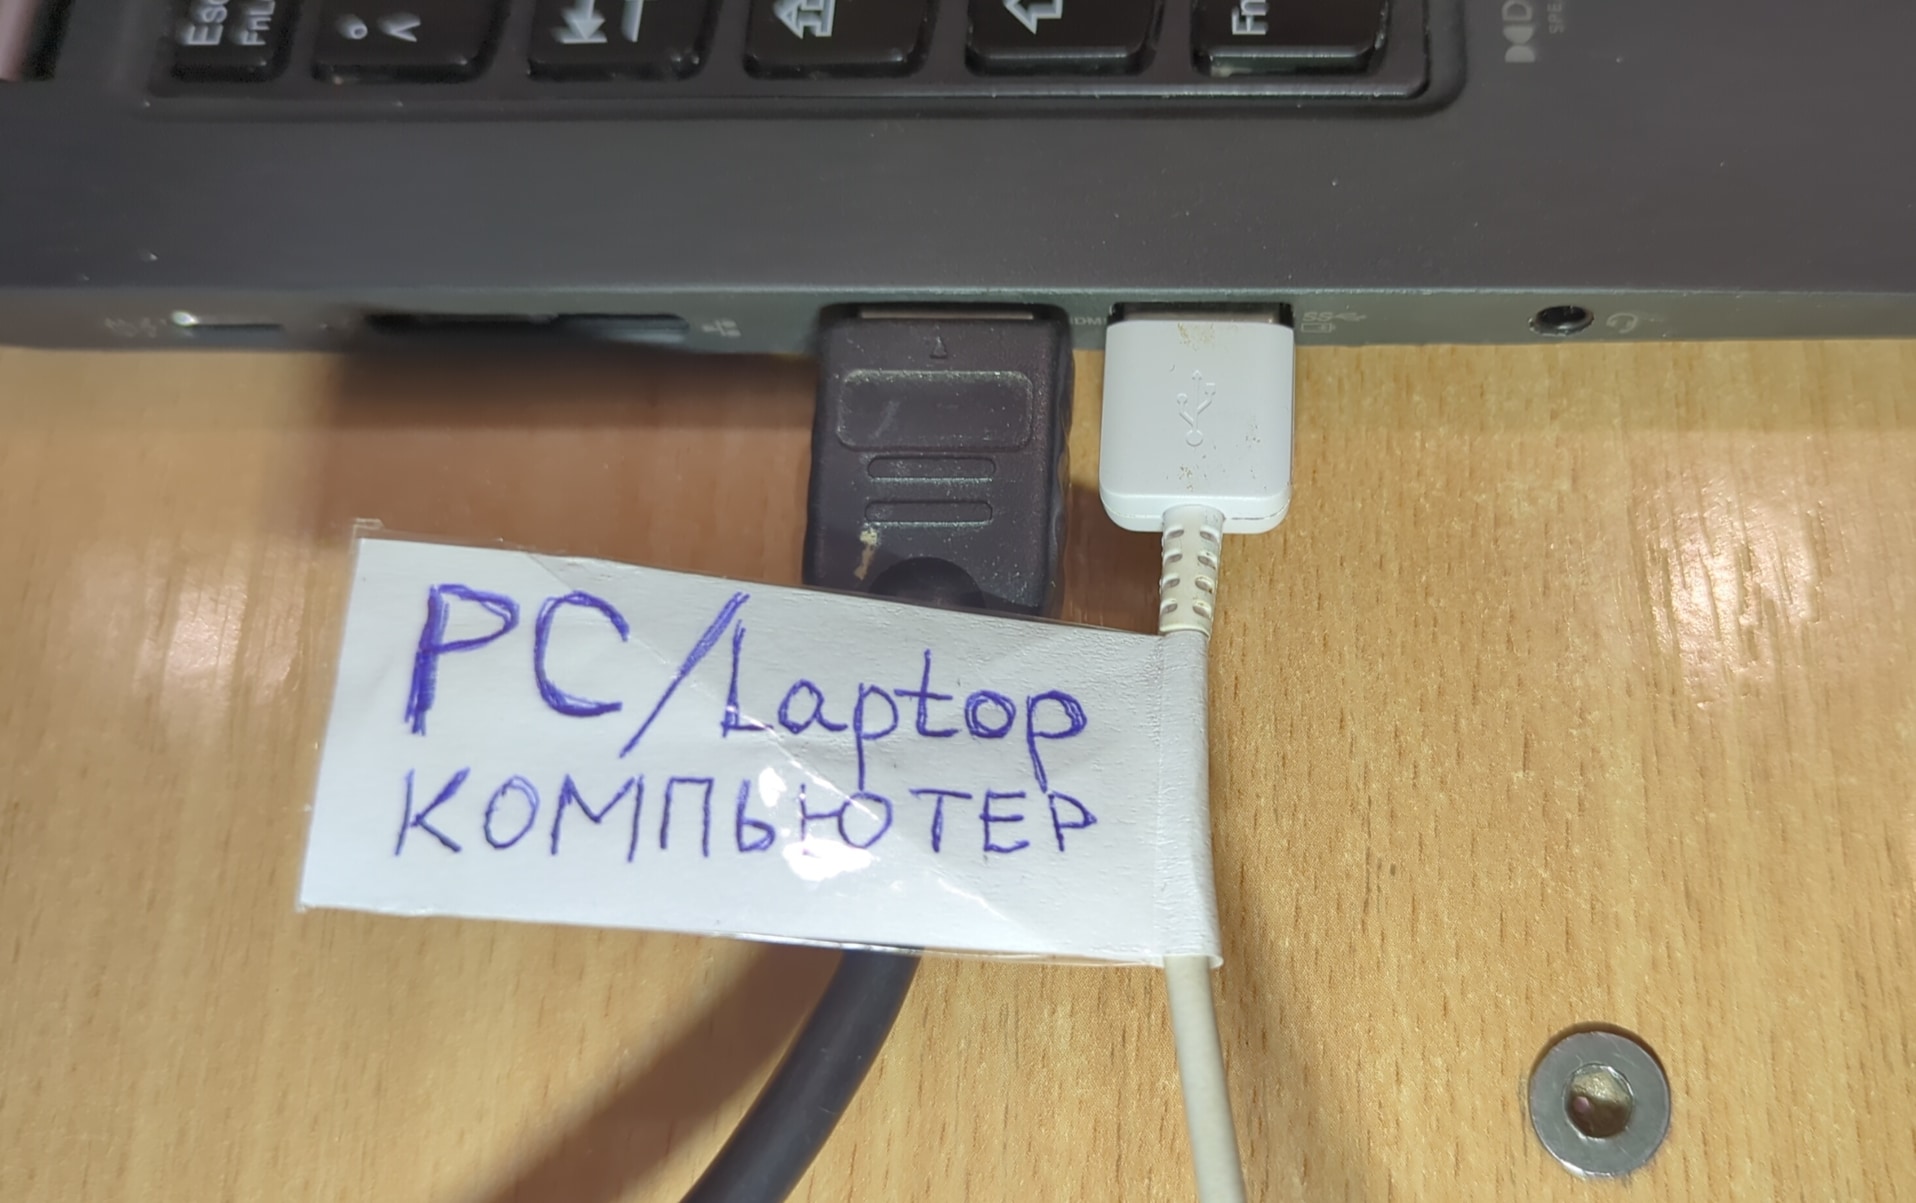 USB-A data cable connected to the laptop (will act as USB keyboard/mouse in target system).